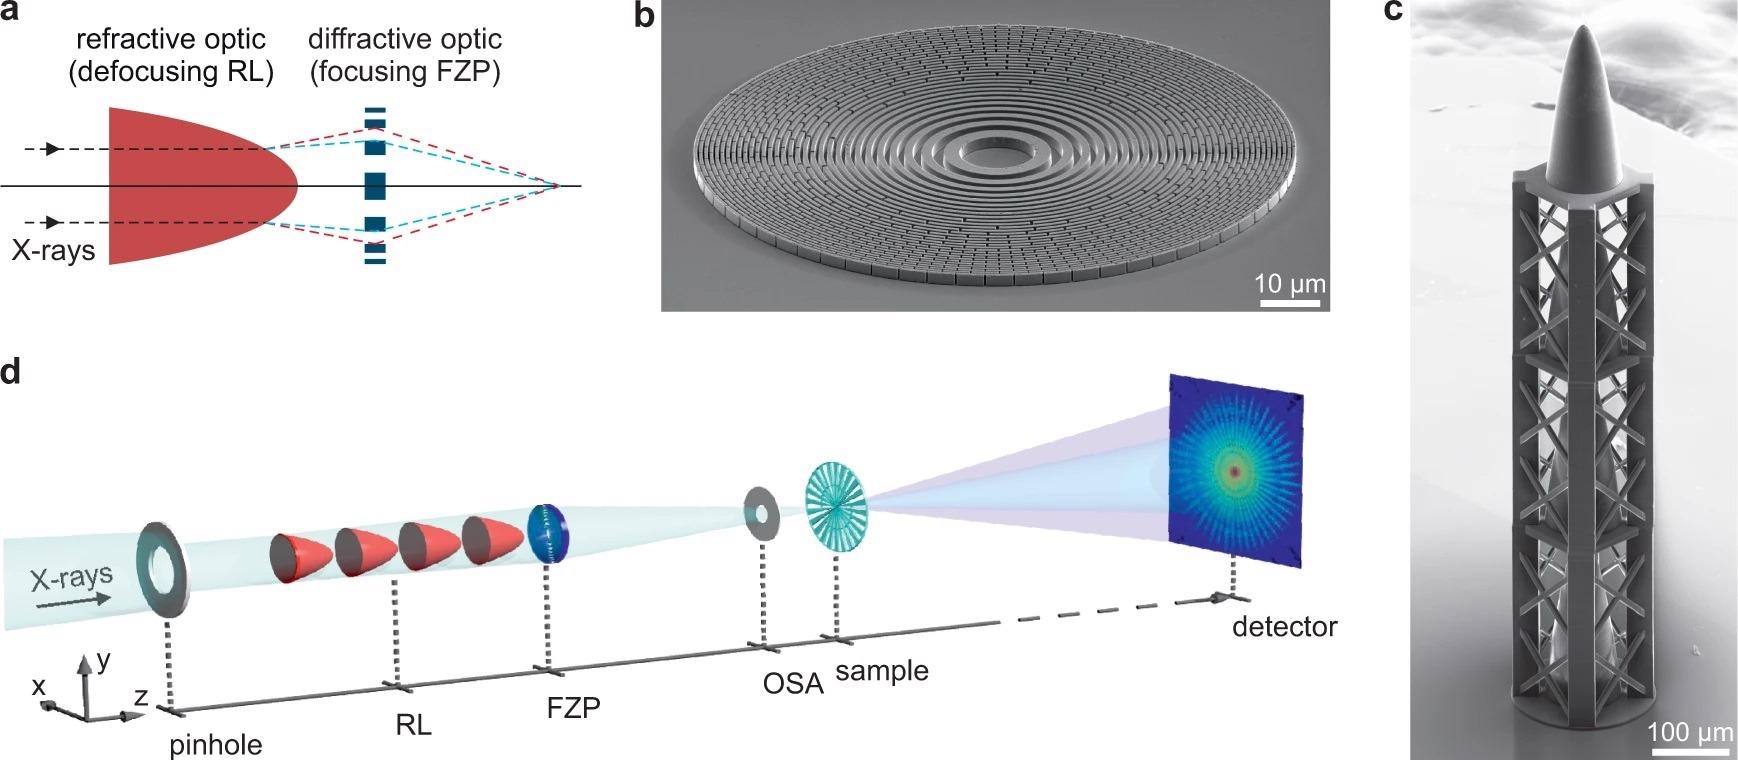 Concept of the X-ray achromat and experimental setup. a Principle of achromatic focusing: The chromaticity of the defocusing refractive lens (RL) acts as a corrector for the chromatic behavior of the focusing Fresnel zone plate (FZP). b Scanning electron microscopy (SEM) image of a nickel FZP fabricated by electron-beam lithography and nickel electroplating, as used for the comparison measurements. c SEM image of the RL consisting of four stacked paraboloids 3D-printed using two-photon polymerisation lithography. d Sketch of the experimental setup for scanning transmission X-ray microscopy (STXM) and ptychography using the achromat as a focusing optic.